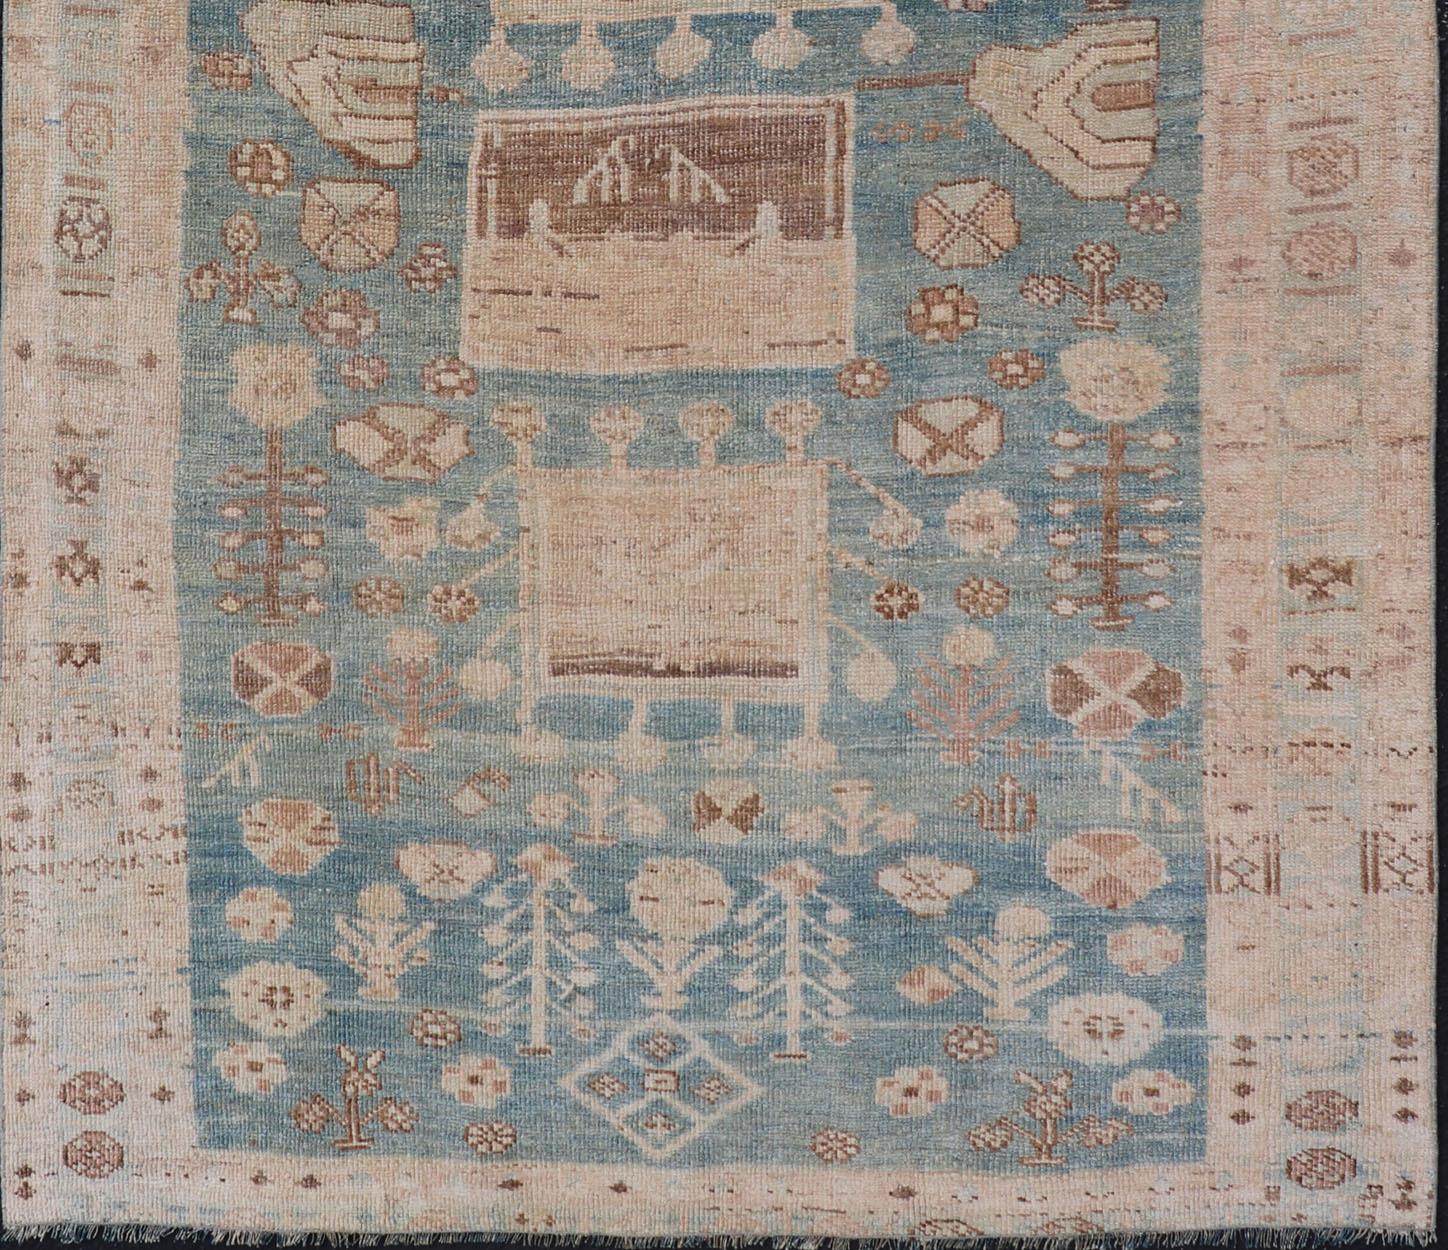 20th Century Persian Kurdish Antique Rug with Tribal Design in Light Blue, Teal, and Cream For Sale